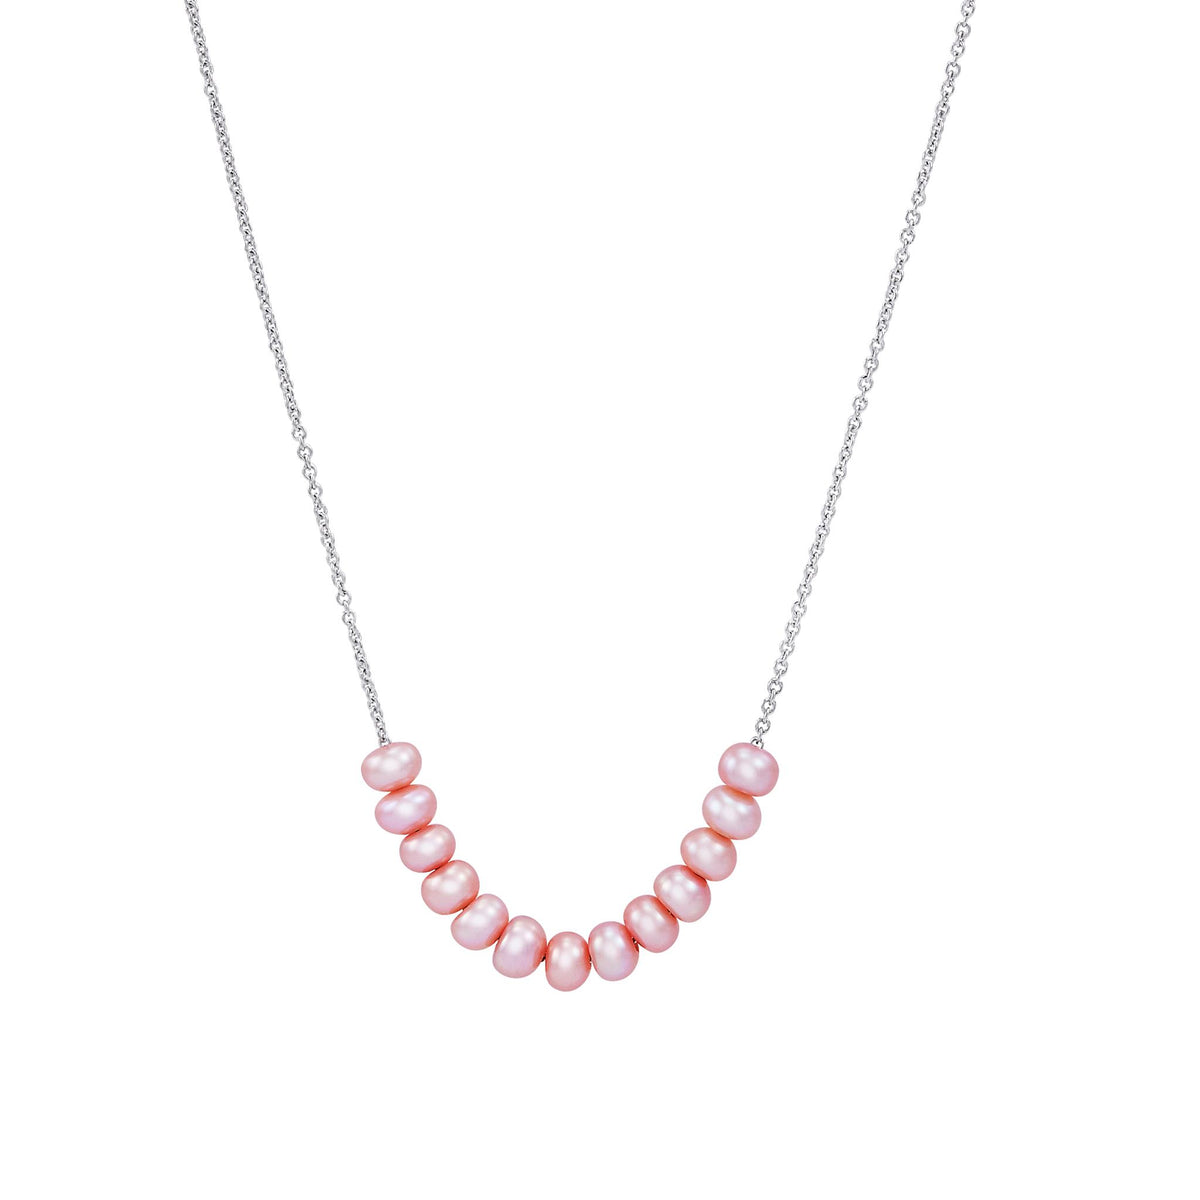 Sterling Silver Children's Necklace With 4x5mm Round Pink Freshwater Cultured Pearls